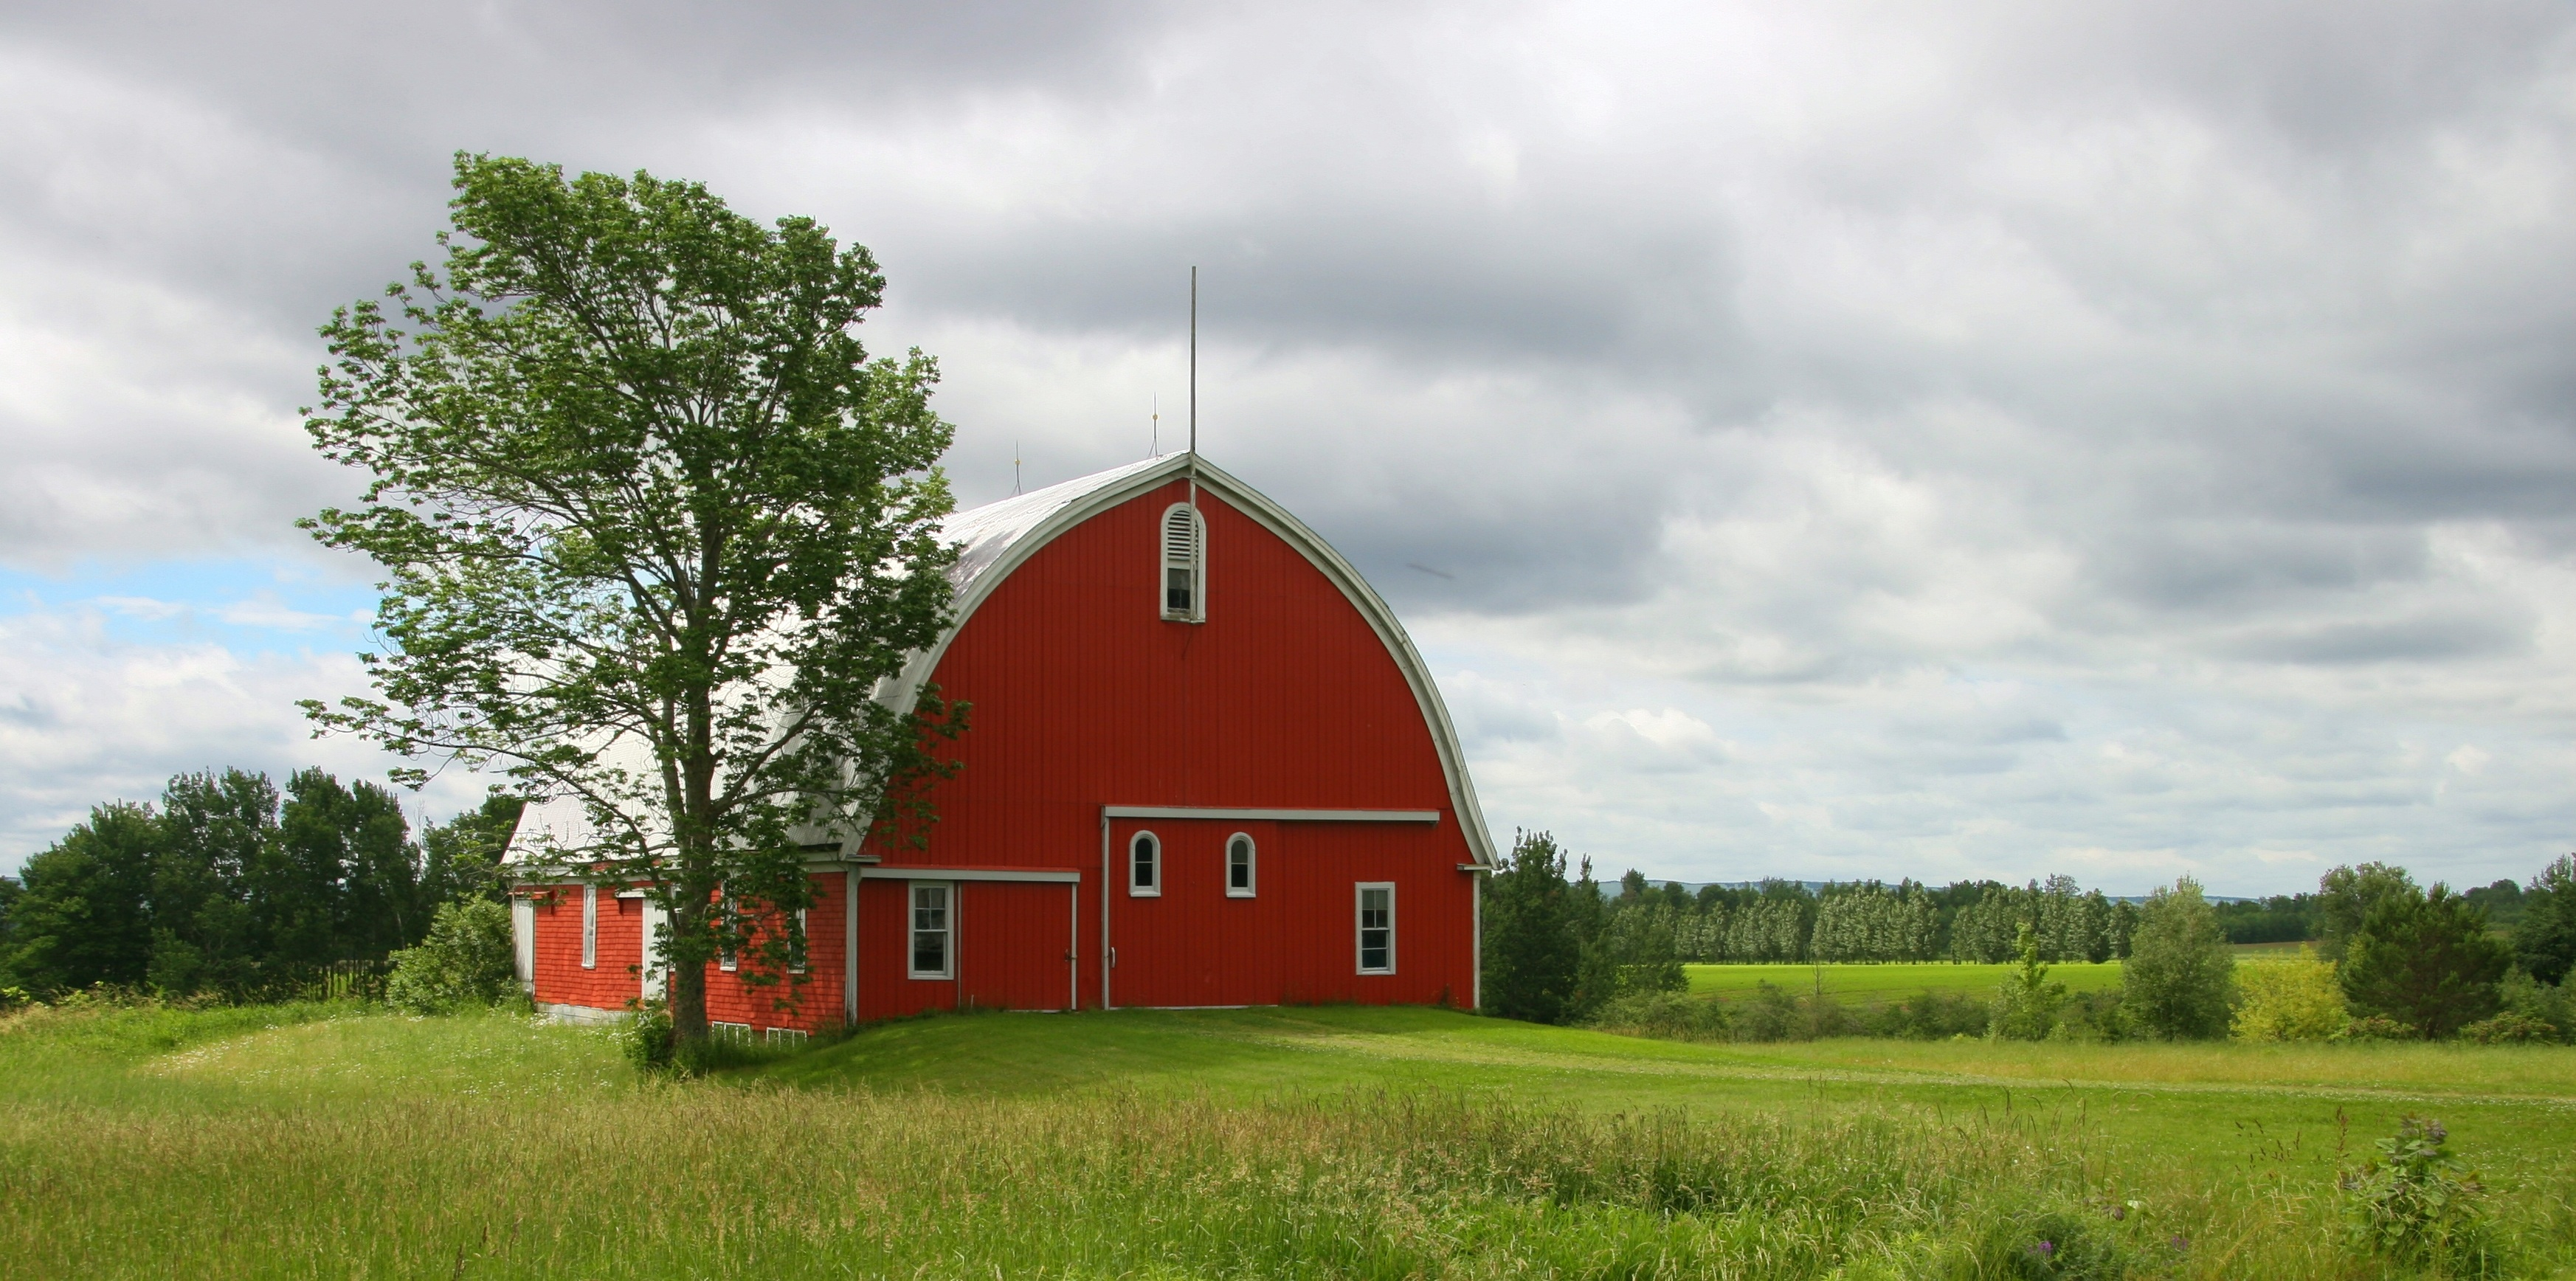 3491x1736 Red Barn Photos, Download Free Red Barn Stock Photos \u0026 HD Images